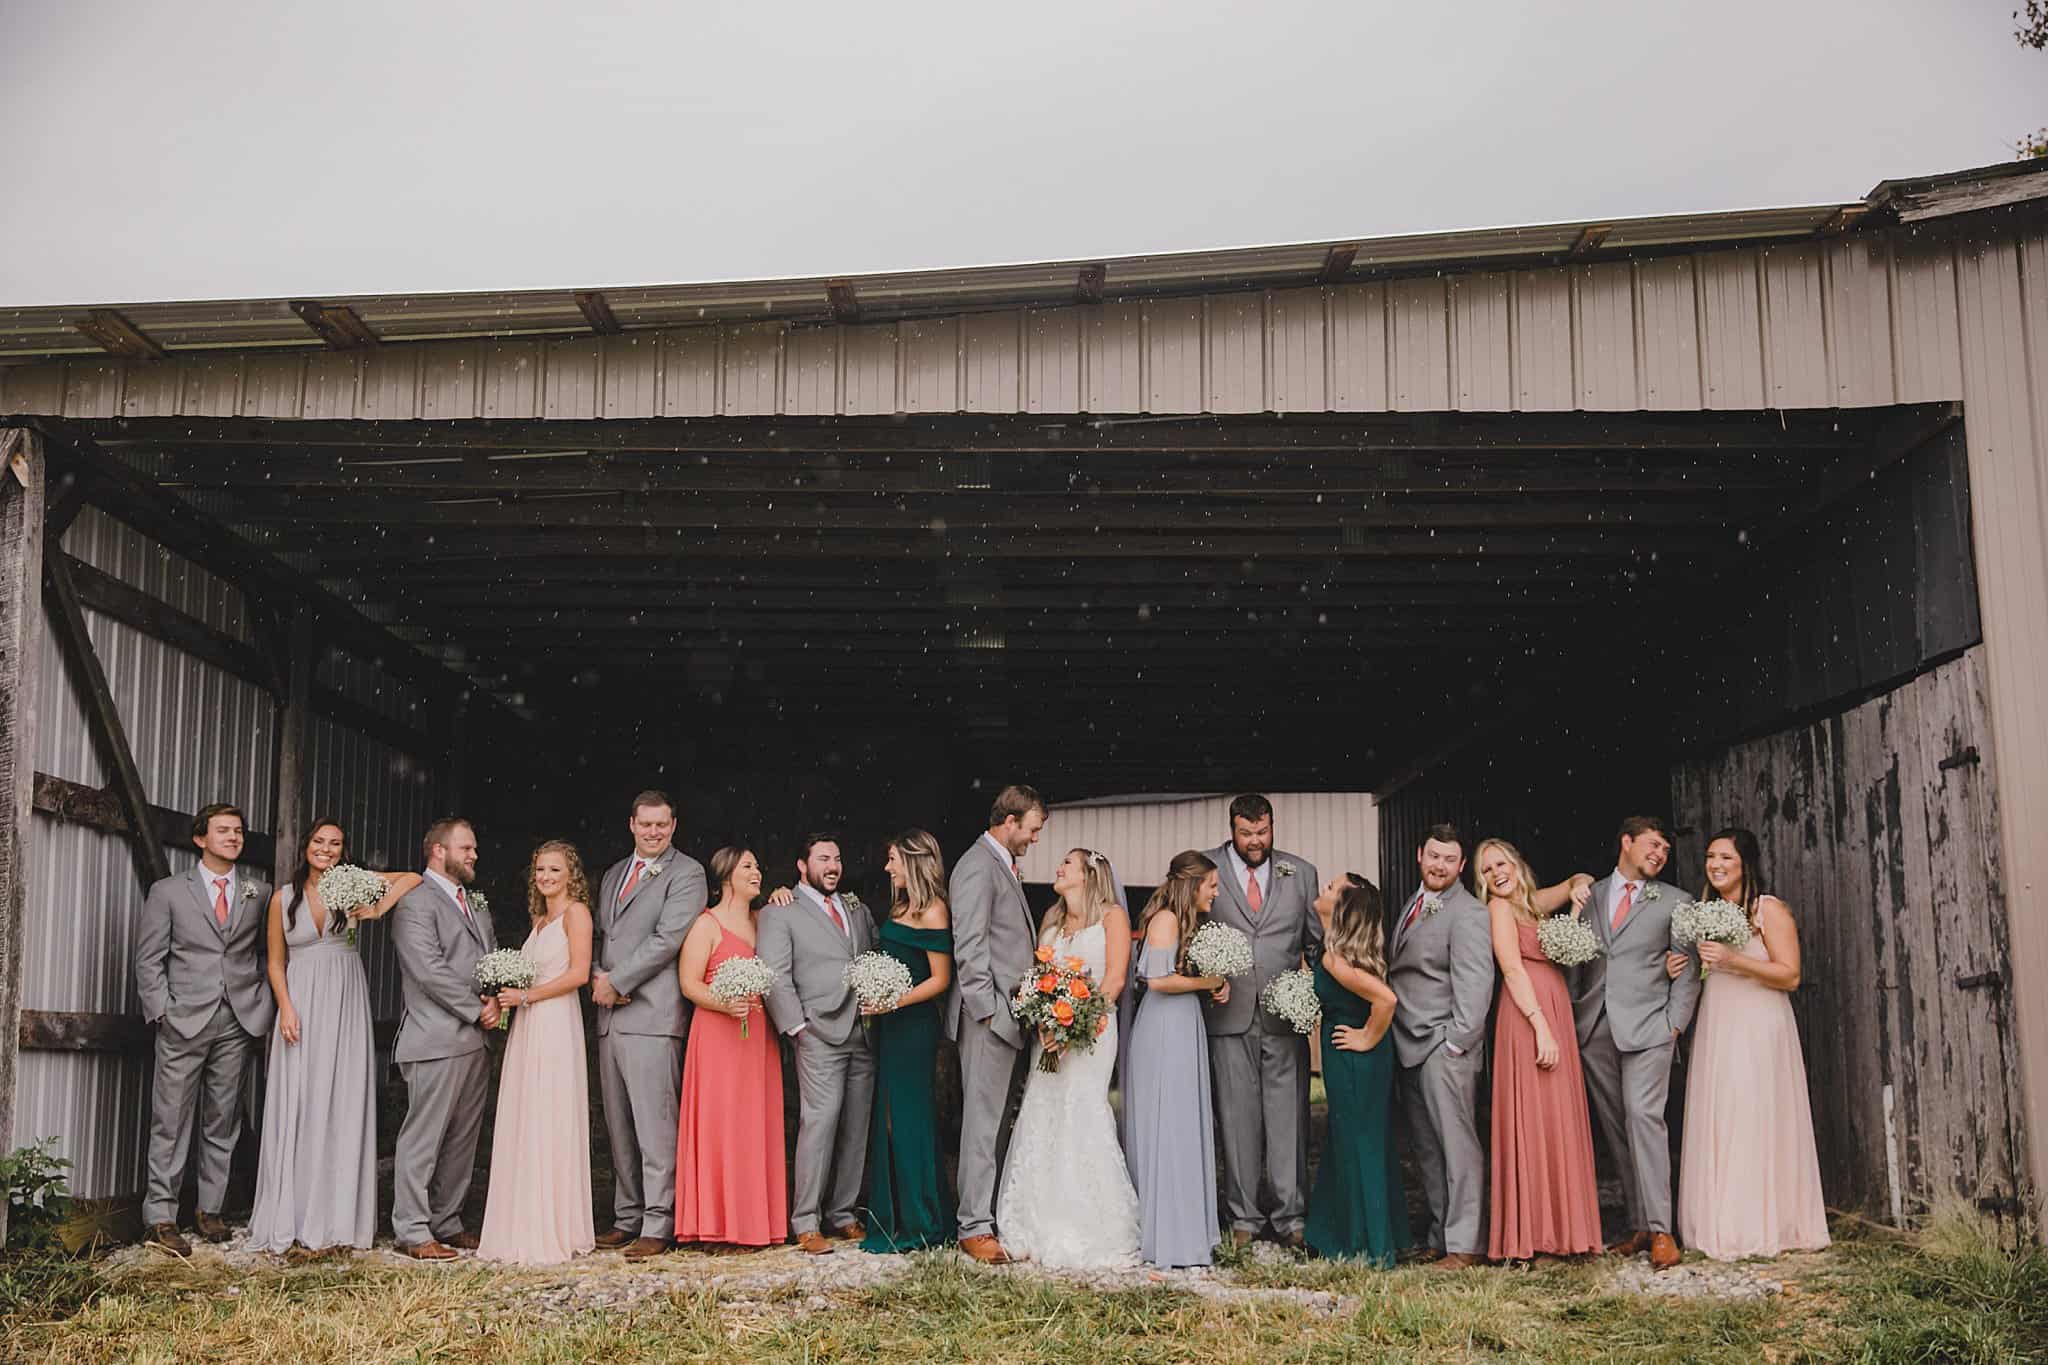 Emma & Easton - Rainy Day Fall Farm Wedding in Cookeville, Tennessee